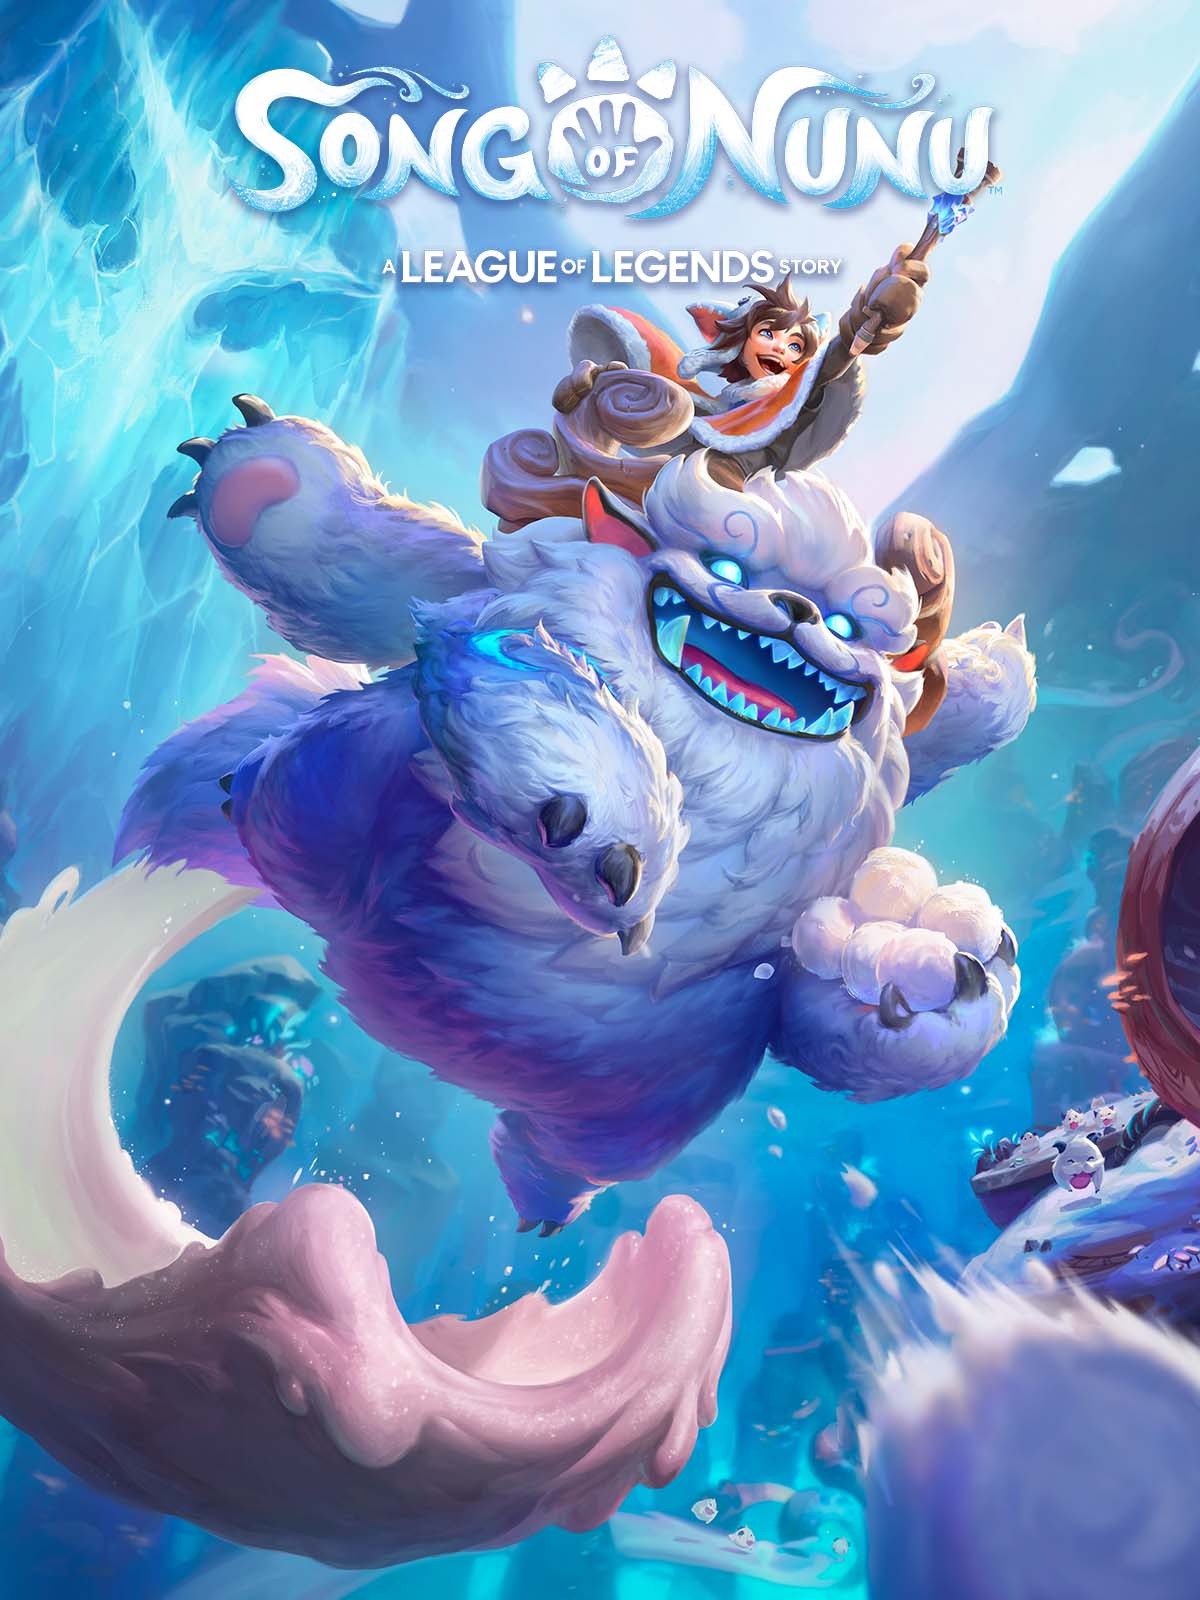 Song of Nunu: A League of Legends Story (Standard Edition) - Xbox